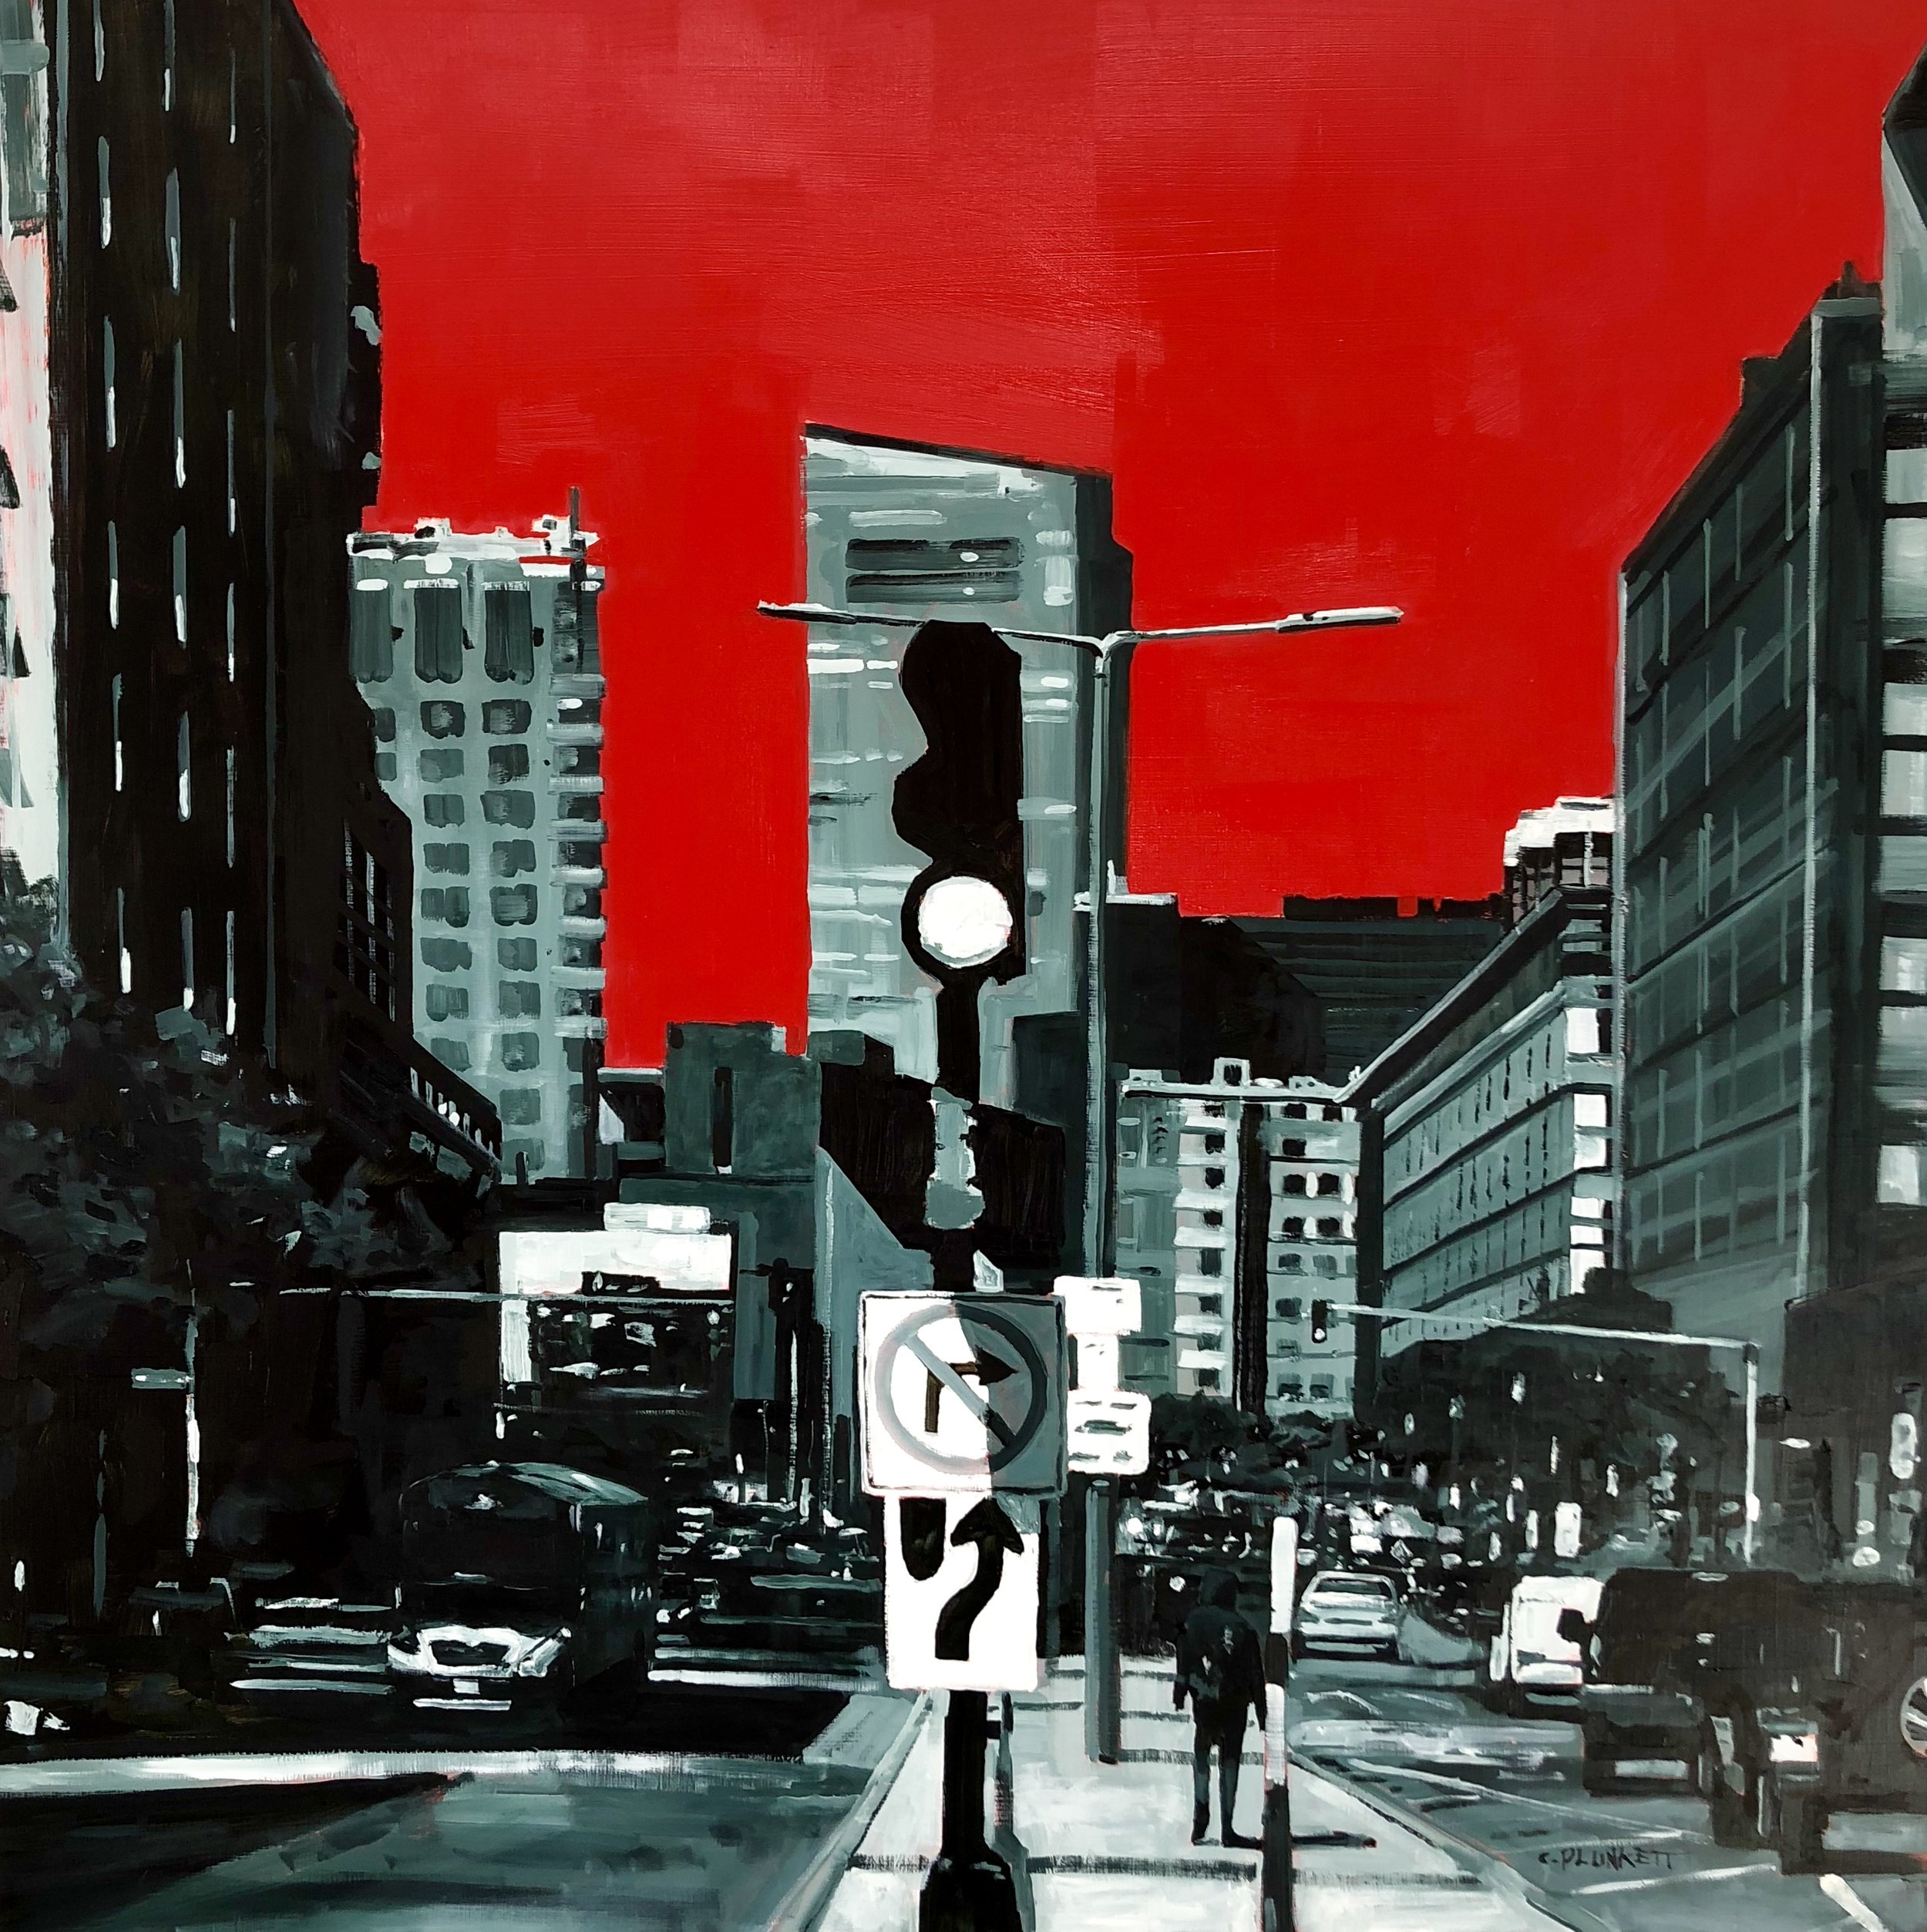  Chris Plunkett,  “E. Berkeley and Harrison Ave. Red Sky”   Oil on cradled wood panel, 30 x 30 inches 